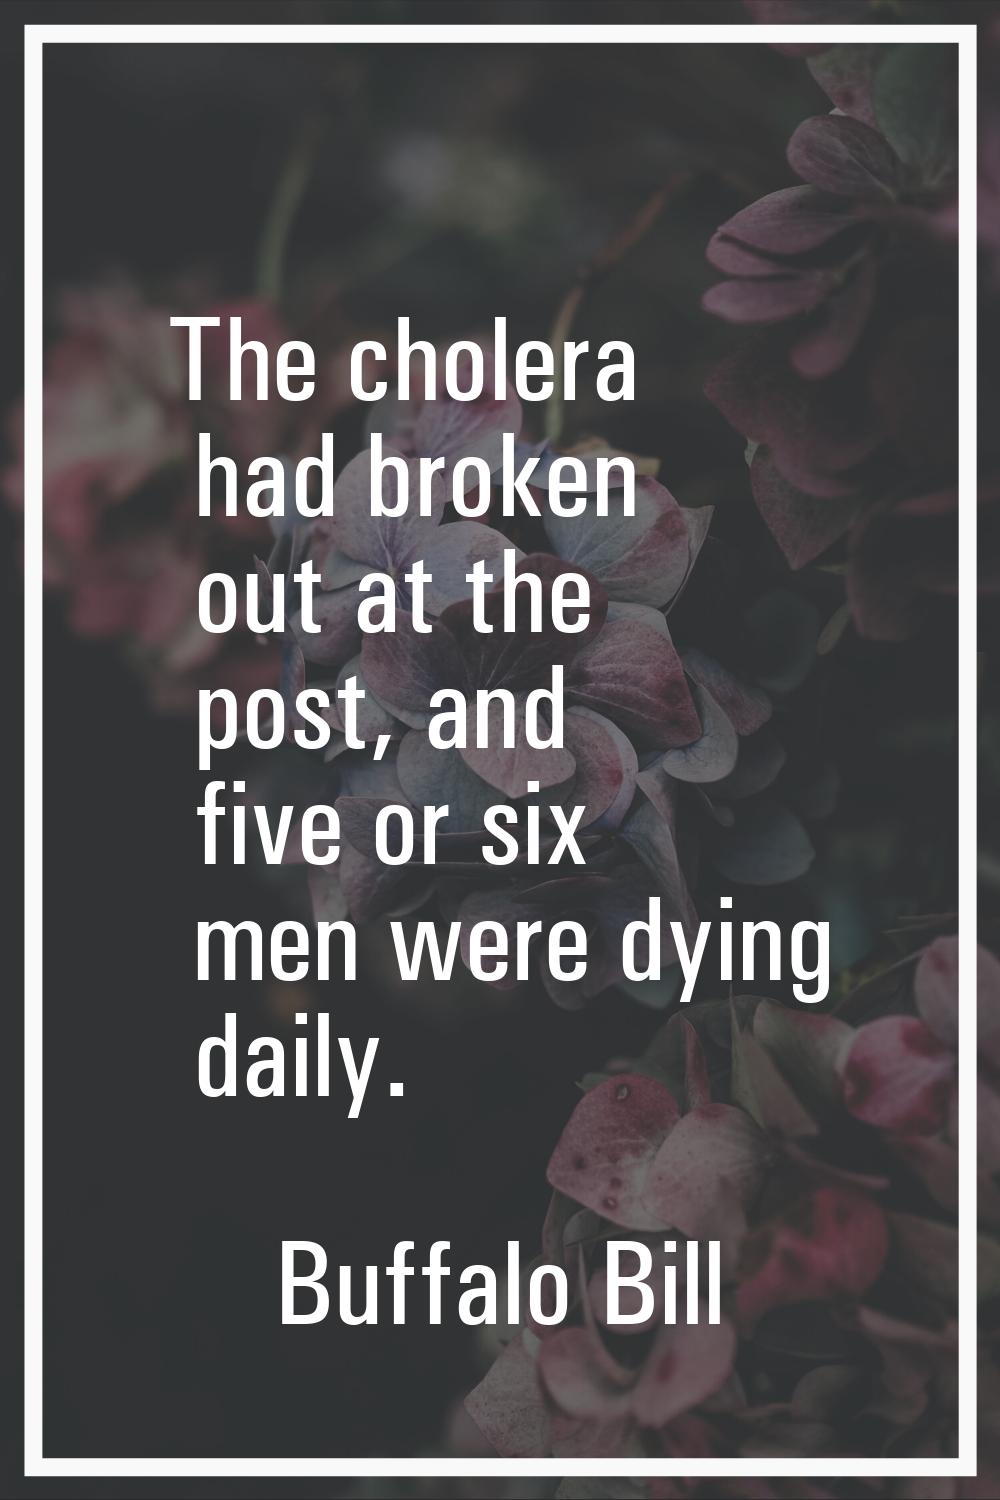 The cholera had broken out at the post, and five or six men were dying daily.